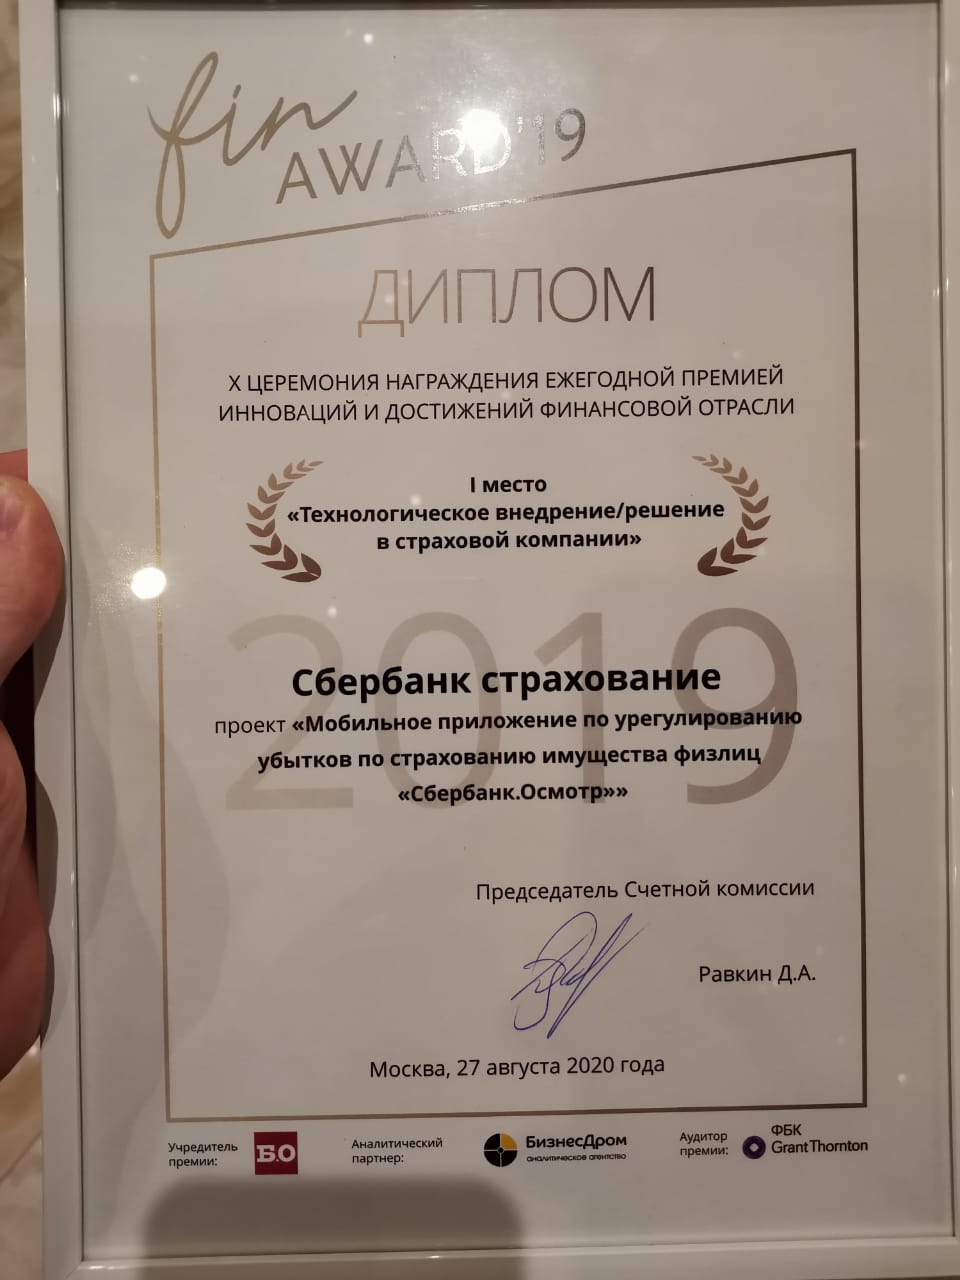 Congratulations from ViewApp team to "Sberbank Insurance" partner for 1st place